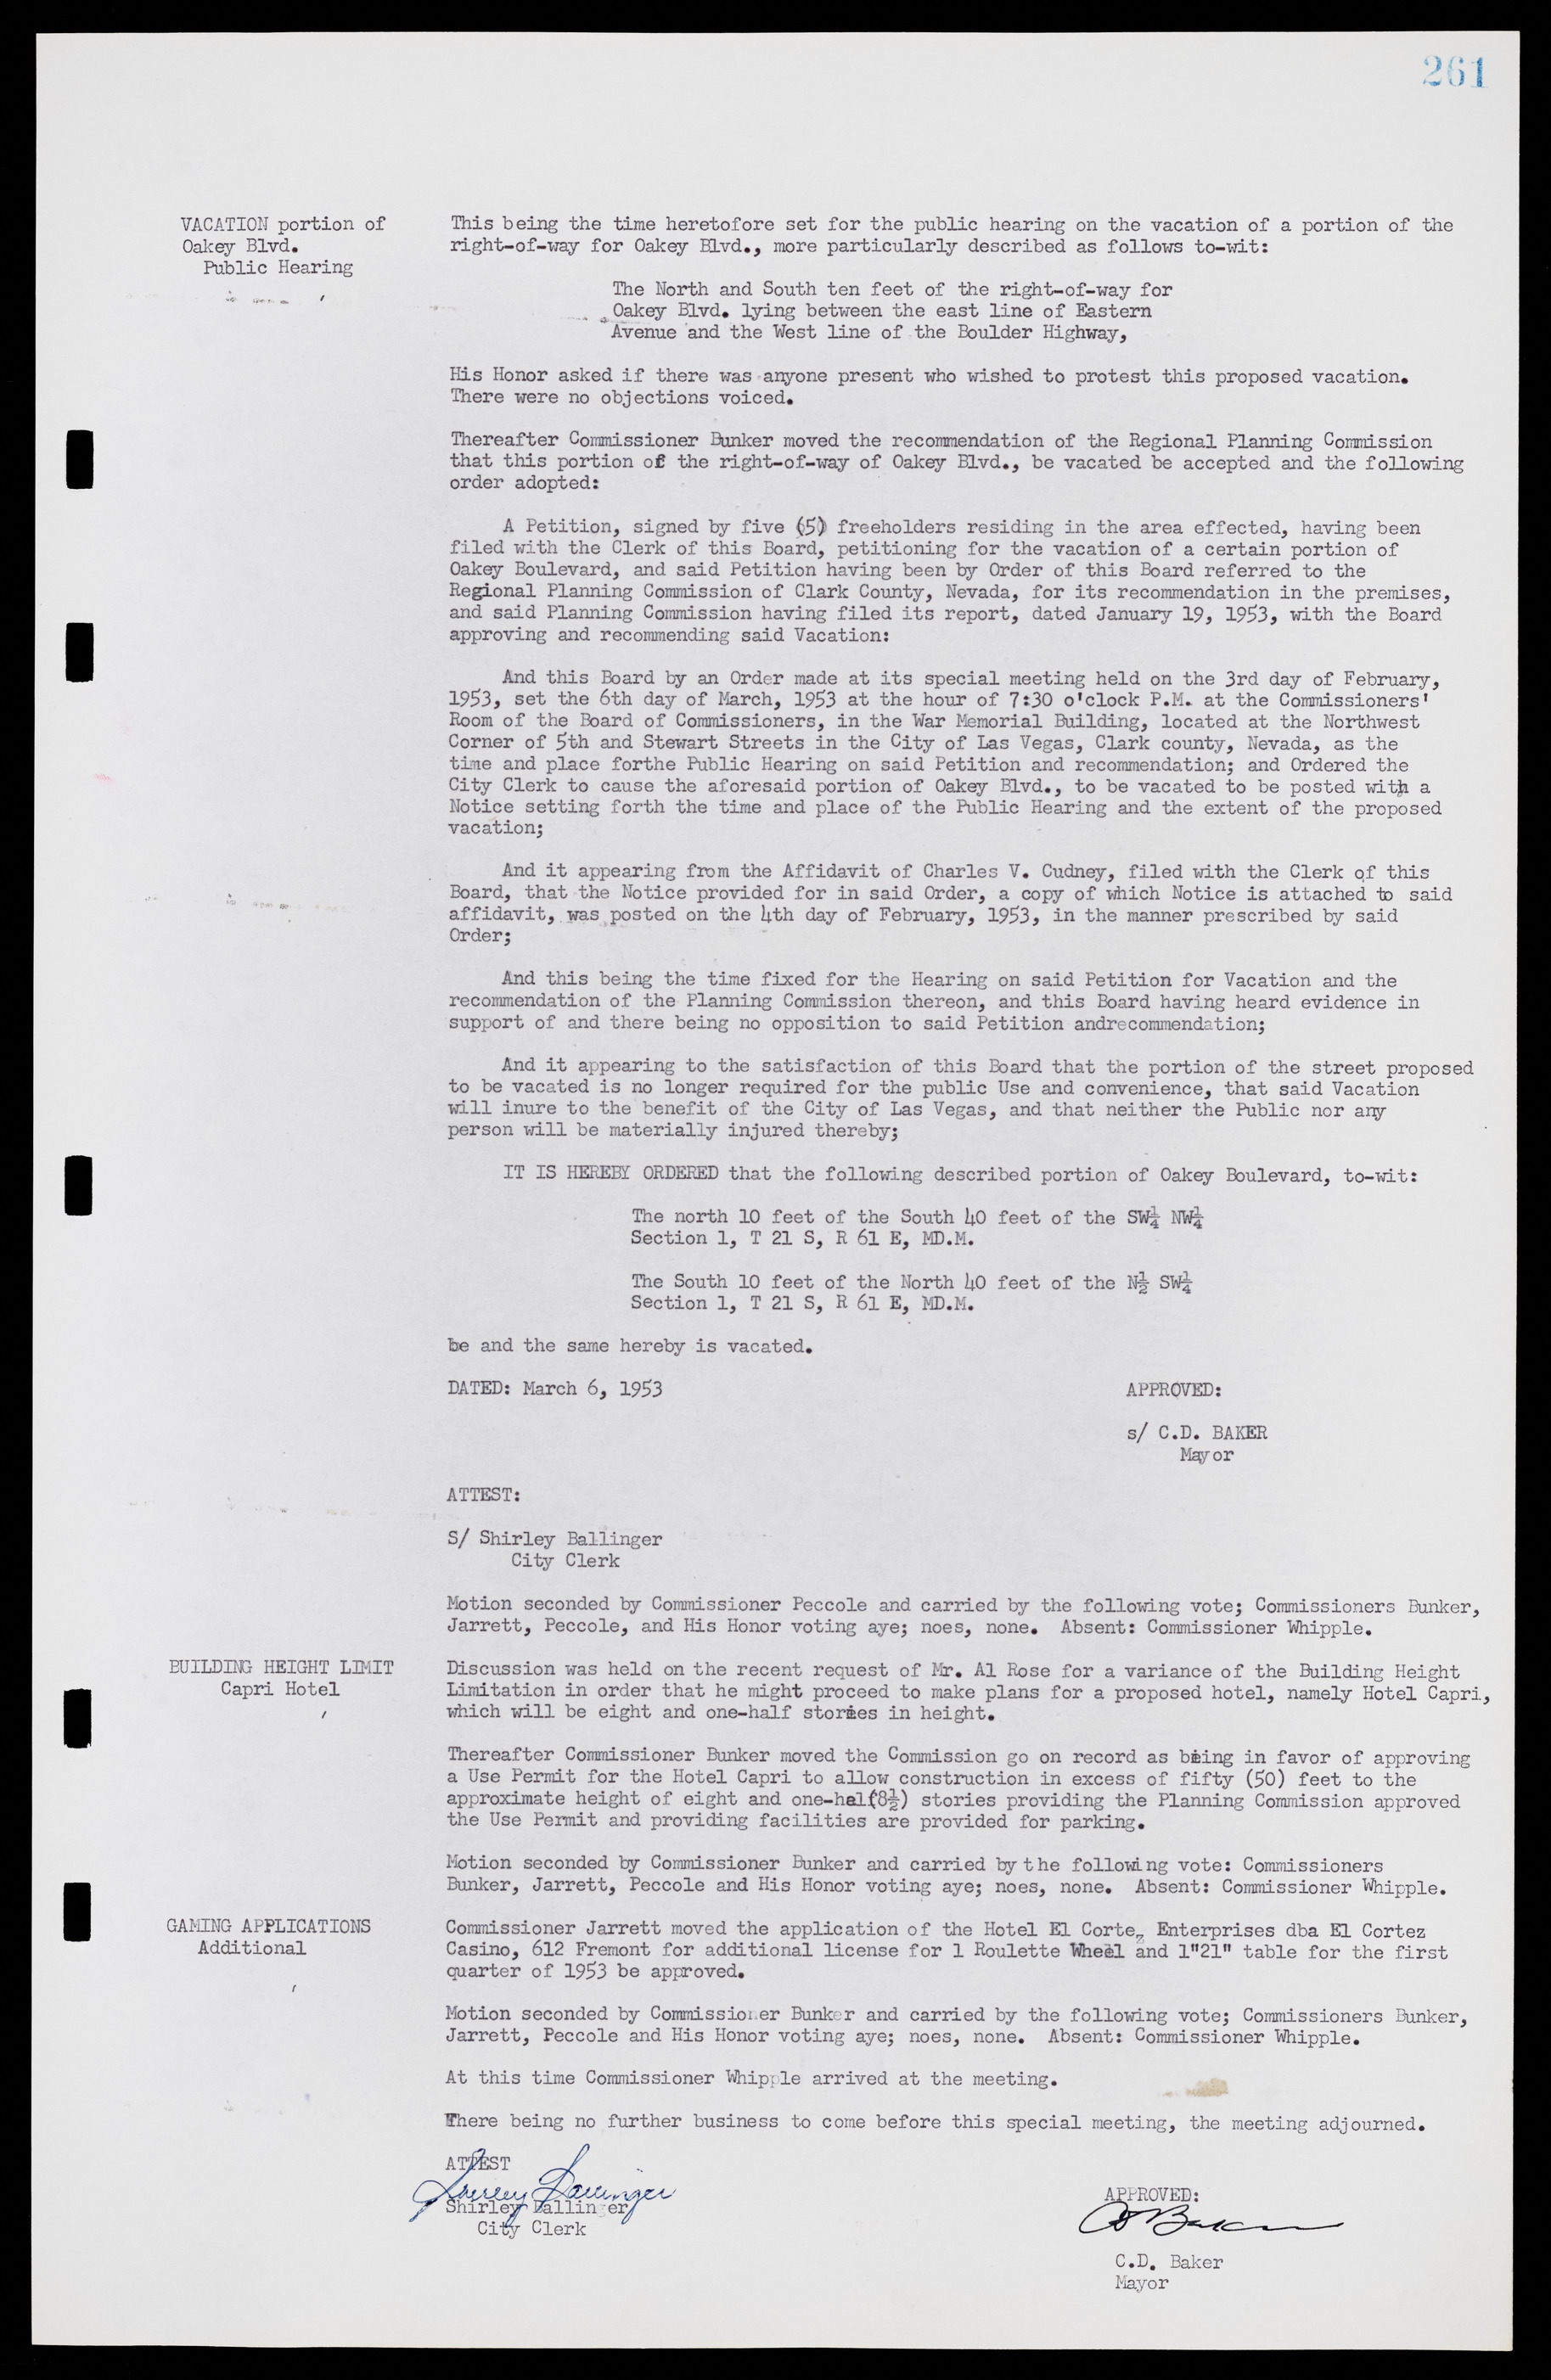 Las Vegas City Commission Minutes, May 26, 1952 to February 17, 1954, lvc000008-277